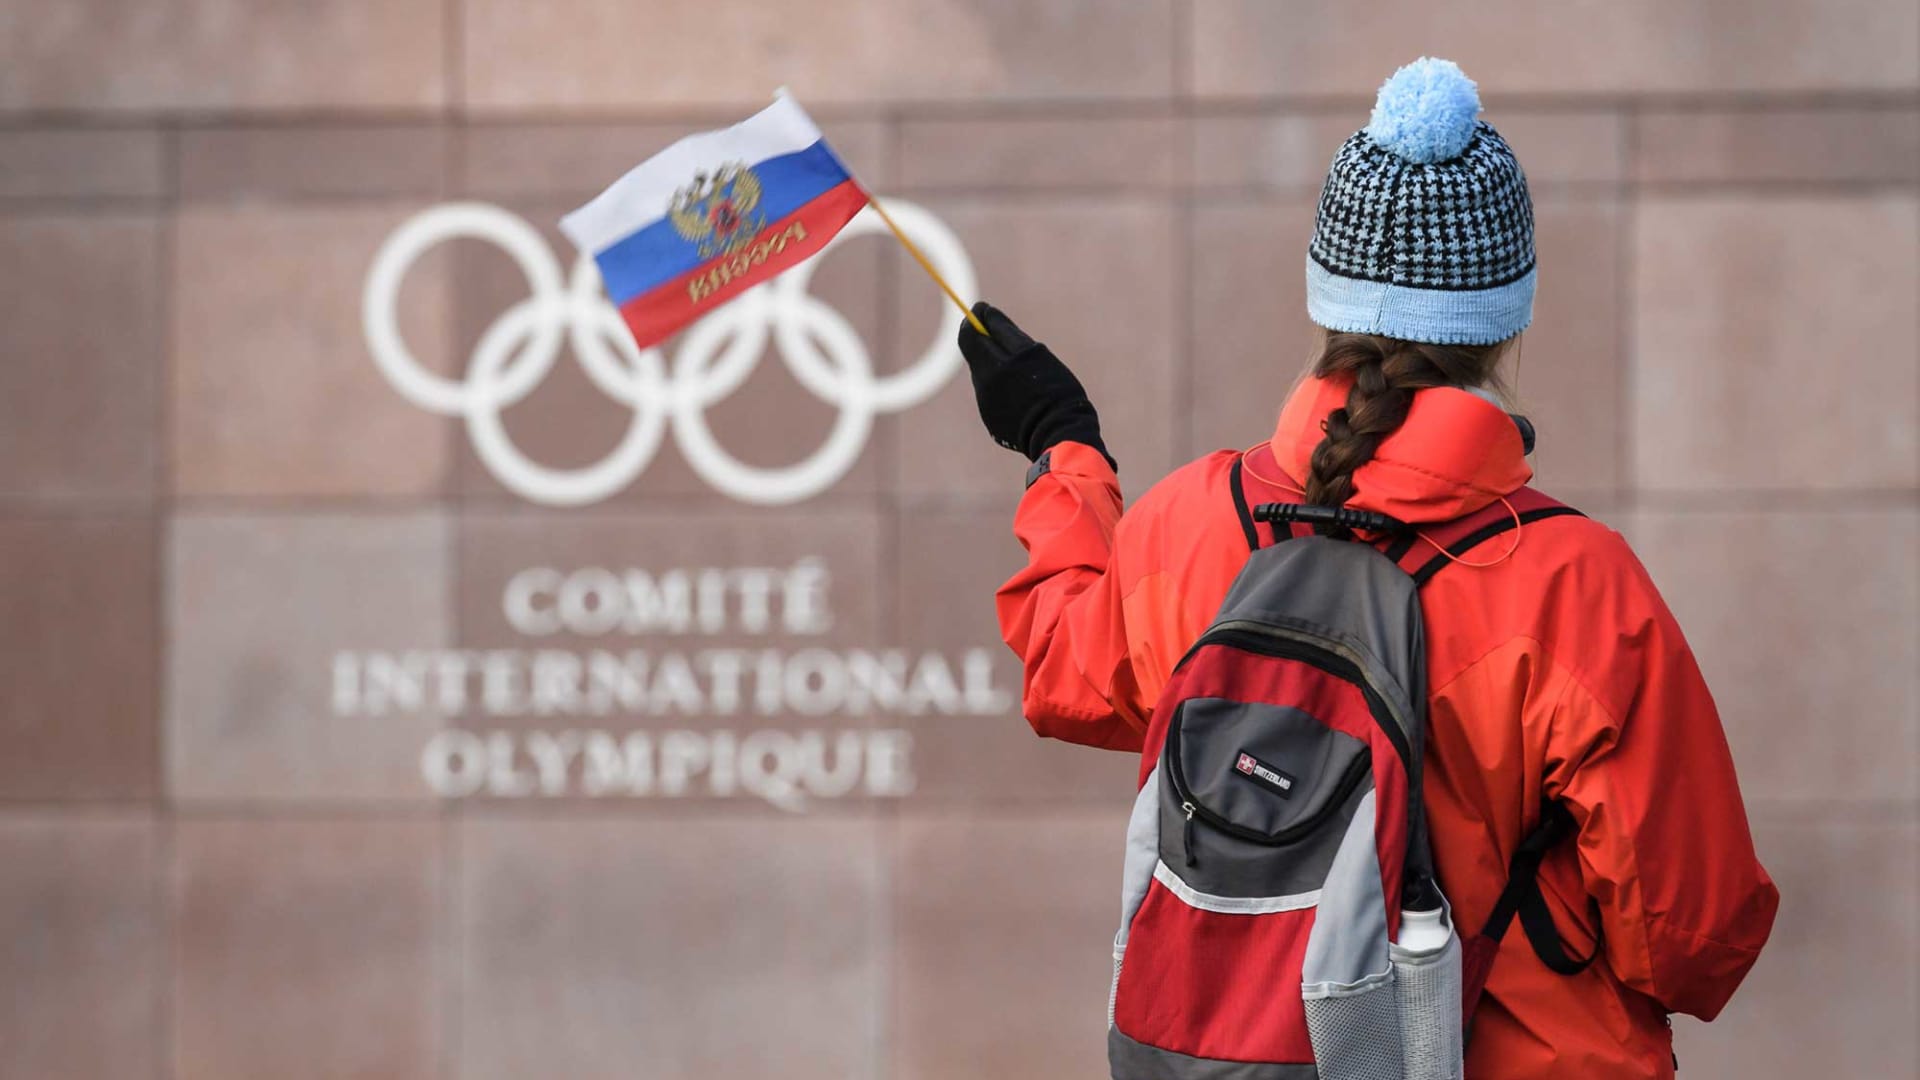 A supporter waves a Russian flag in front of the logo of the International Olympic Committee (IOC) at their headquarters on December 5, 2017 in Pully near Lausanne, Switzerland.